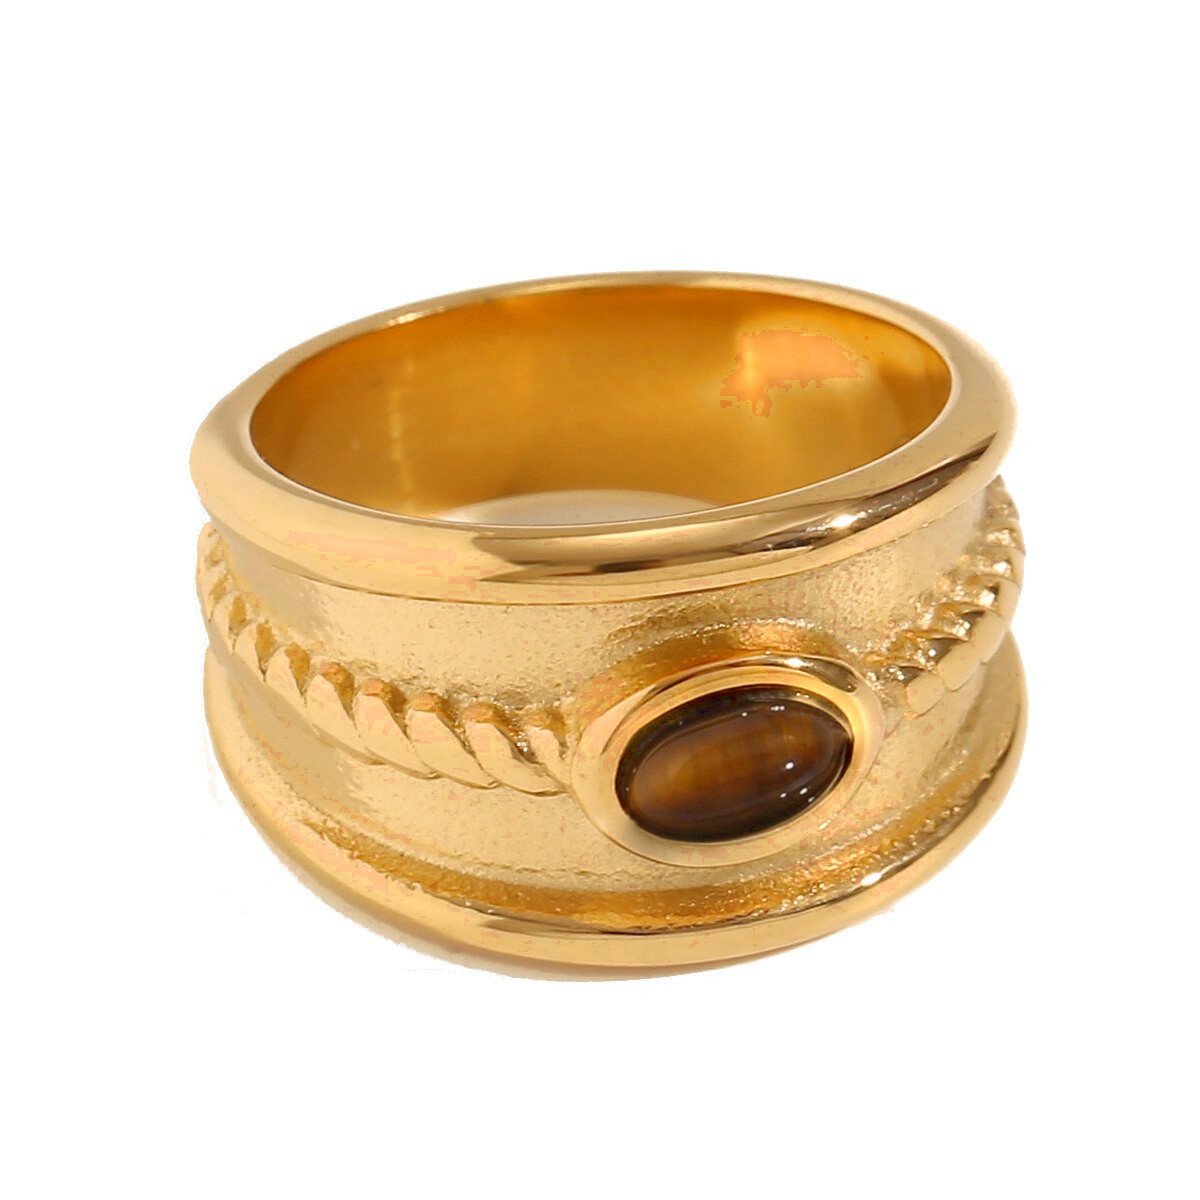 Western Gold Tiger's Eye Ring Band.